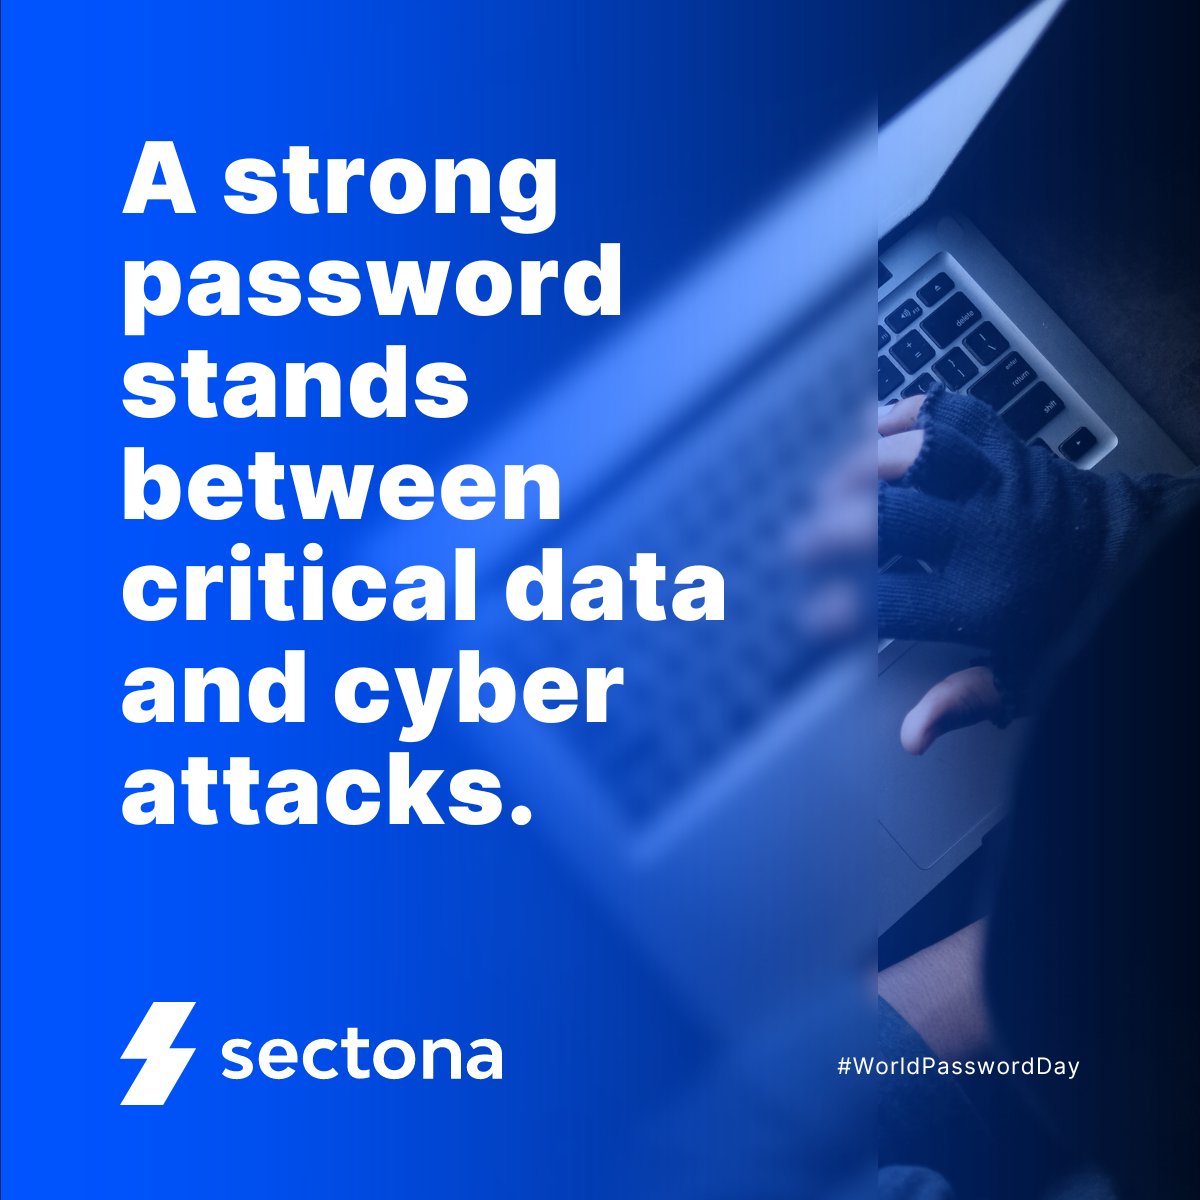 Weak passwords lead to compromised accounts. Set up strong passwords and protect critical assets. Elevate your organization's security with Sectona PAM's robust Password Management. bit.ly/4bCMMSf

#PasswordDay #PasswordManagement #PasswordProtection #Passwords